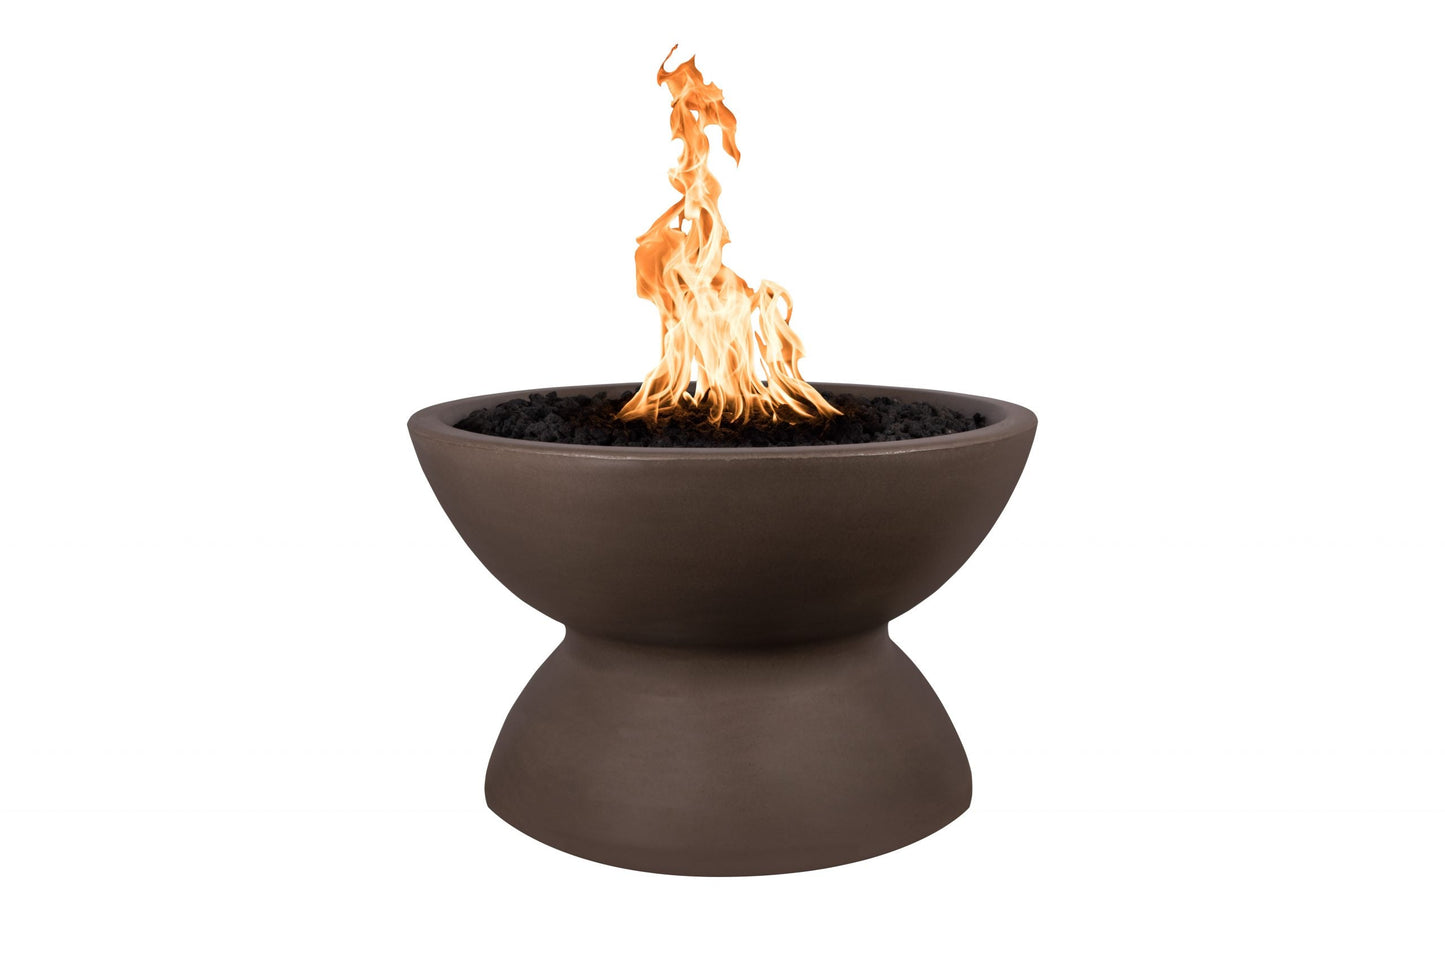 The Outdoor Plus Round Copa 33" Metallic Silver GFRC Concrete Liquid Propane Fire Pit with Match Lit Ignition